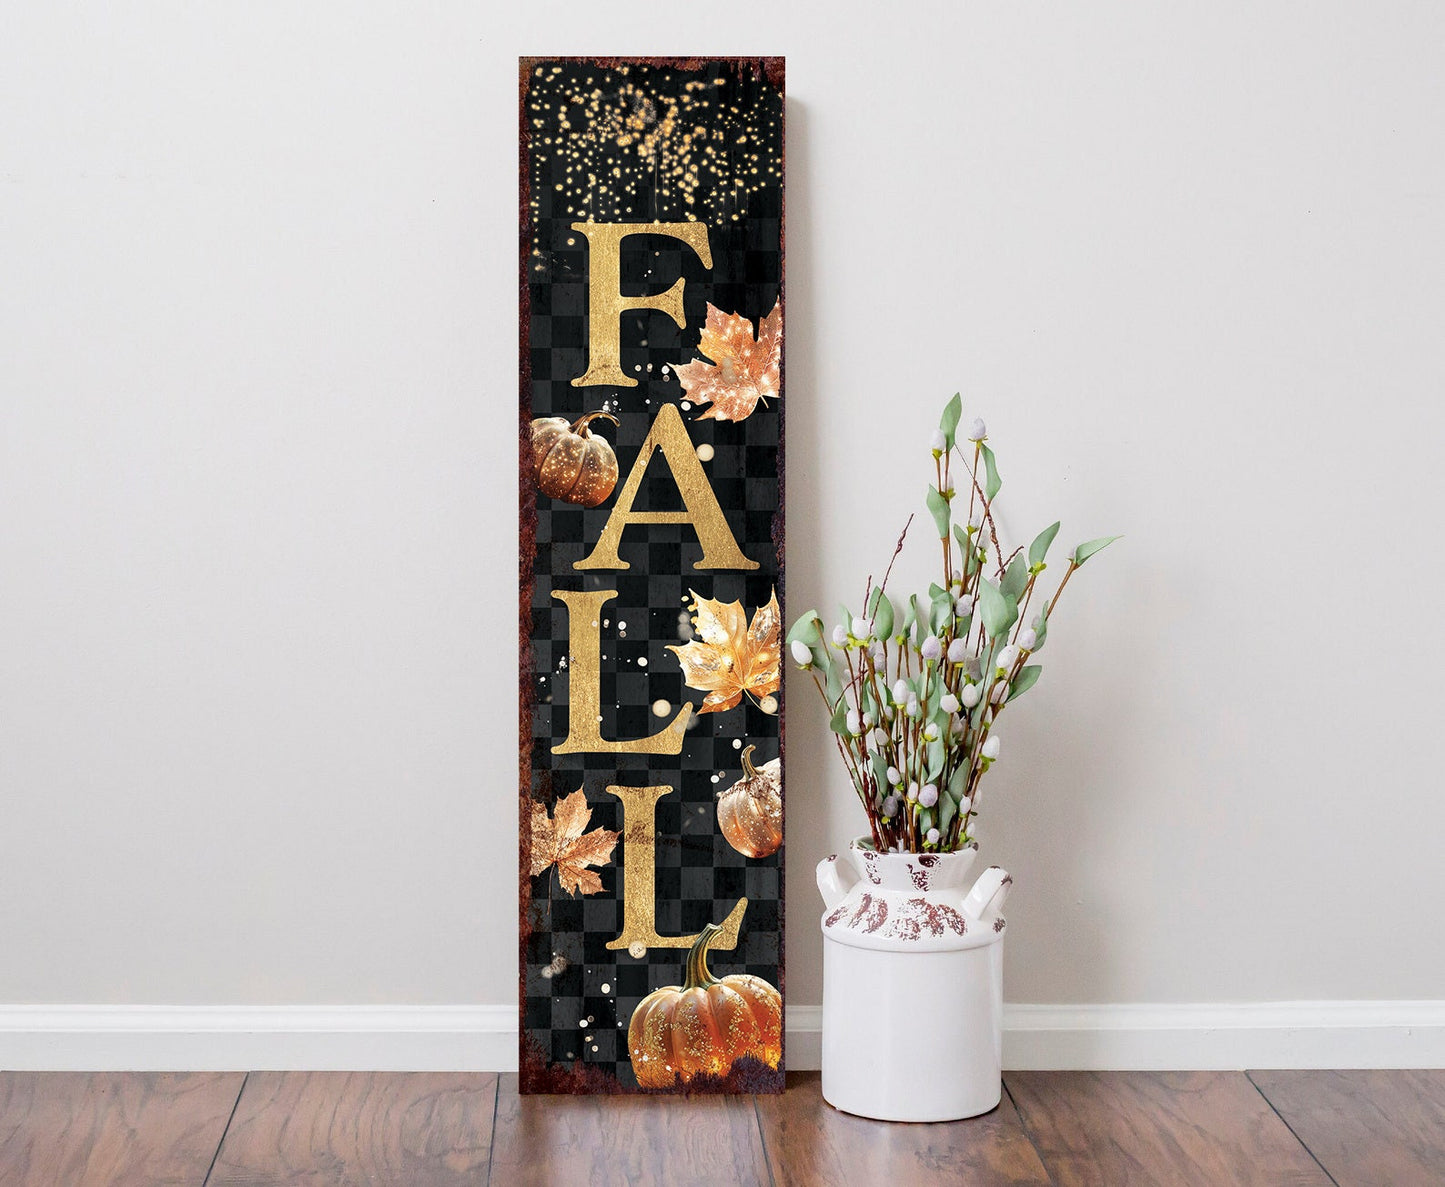 36-inch Fall Porch Sign - Front Porch Fall Welcome Sign with Vintage Autumn Decoration, Rustic Modern Farmhouse Entryway Porch Decor